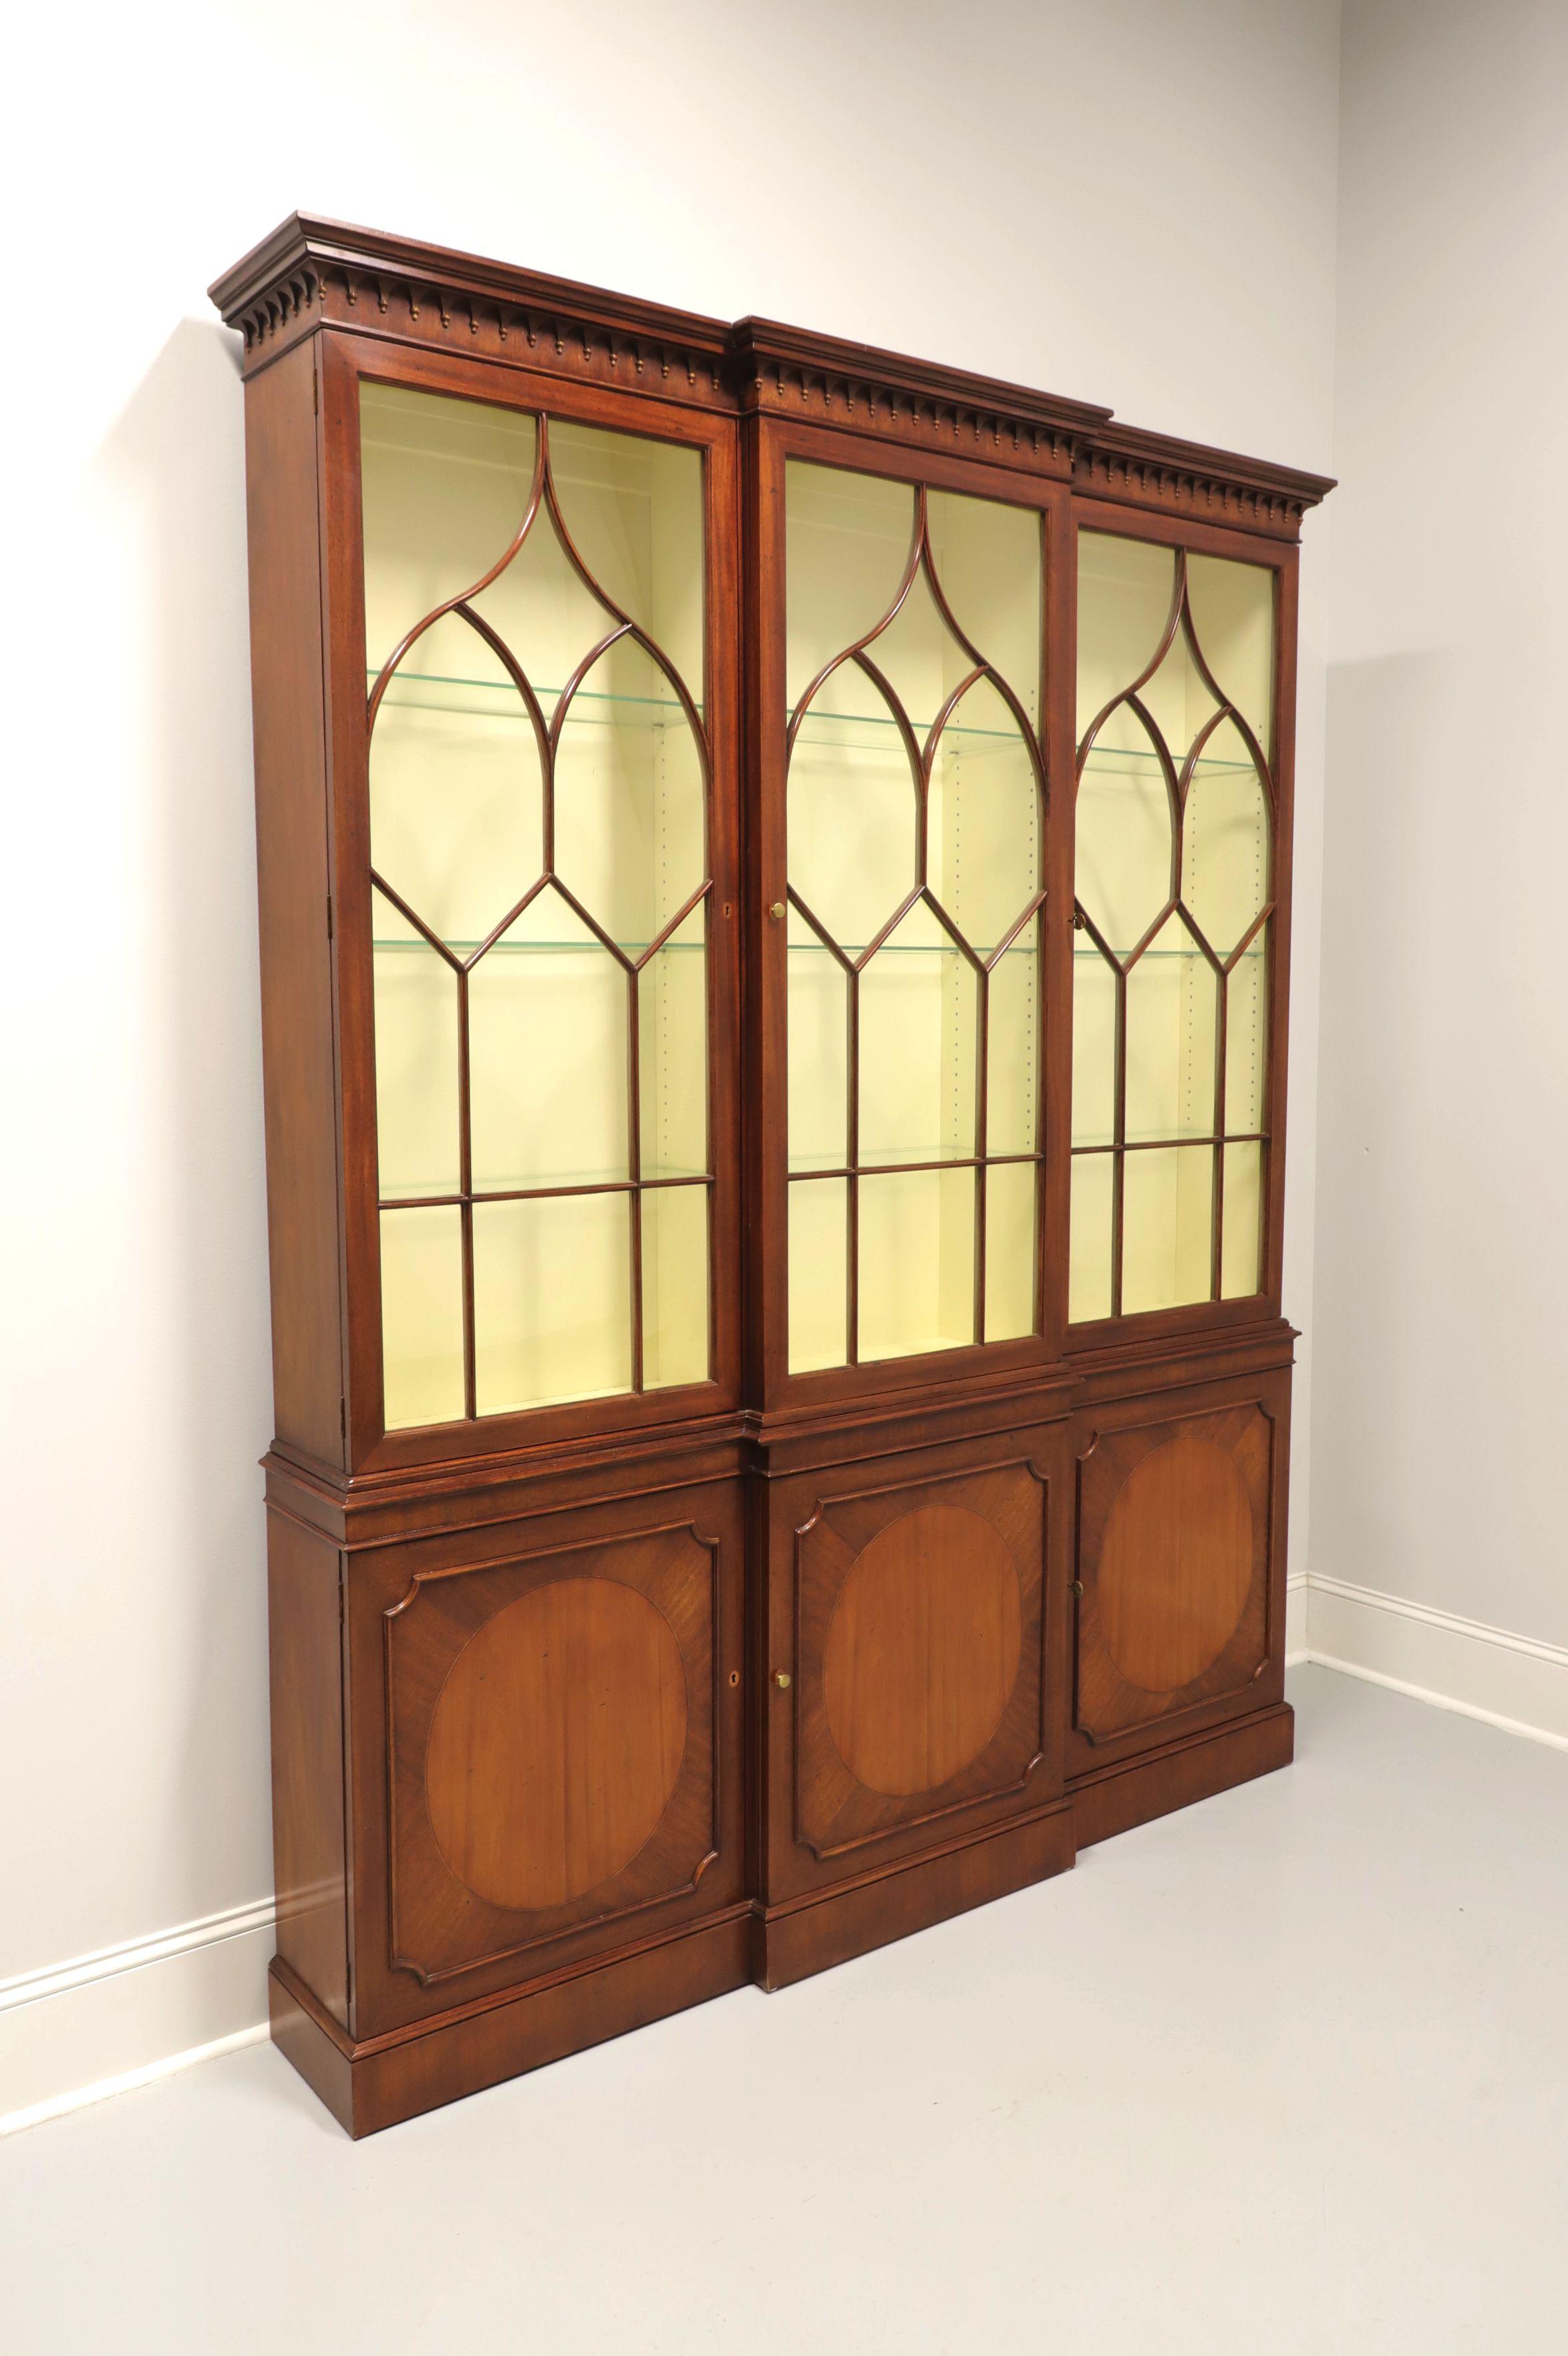 An extra tall Georgian style breakfront china cabinet by Baker Furniture. Mahogany with brass hardware, fretwork to glass doors, inlaid lower door fronts, teardrop like dentils and narrow crown molding to the top. Upper lighted cabinet features